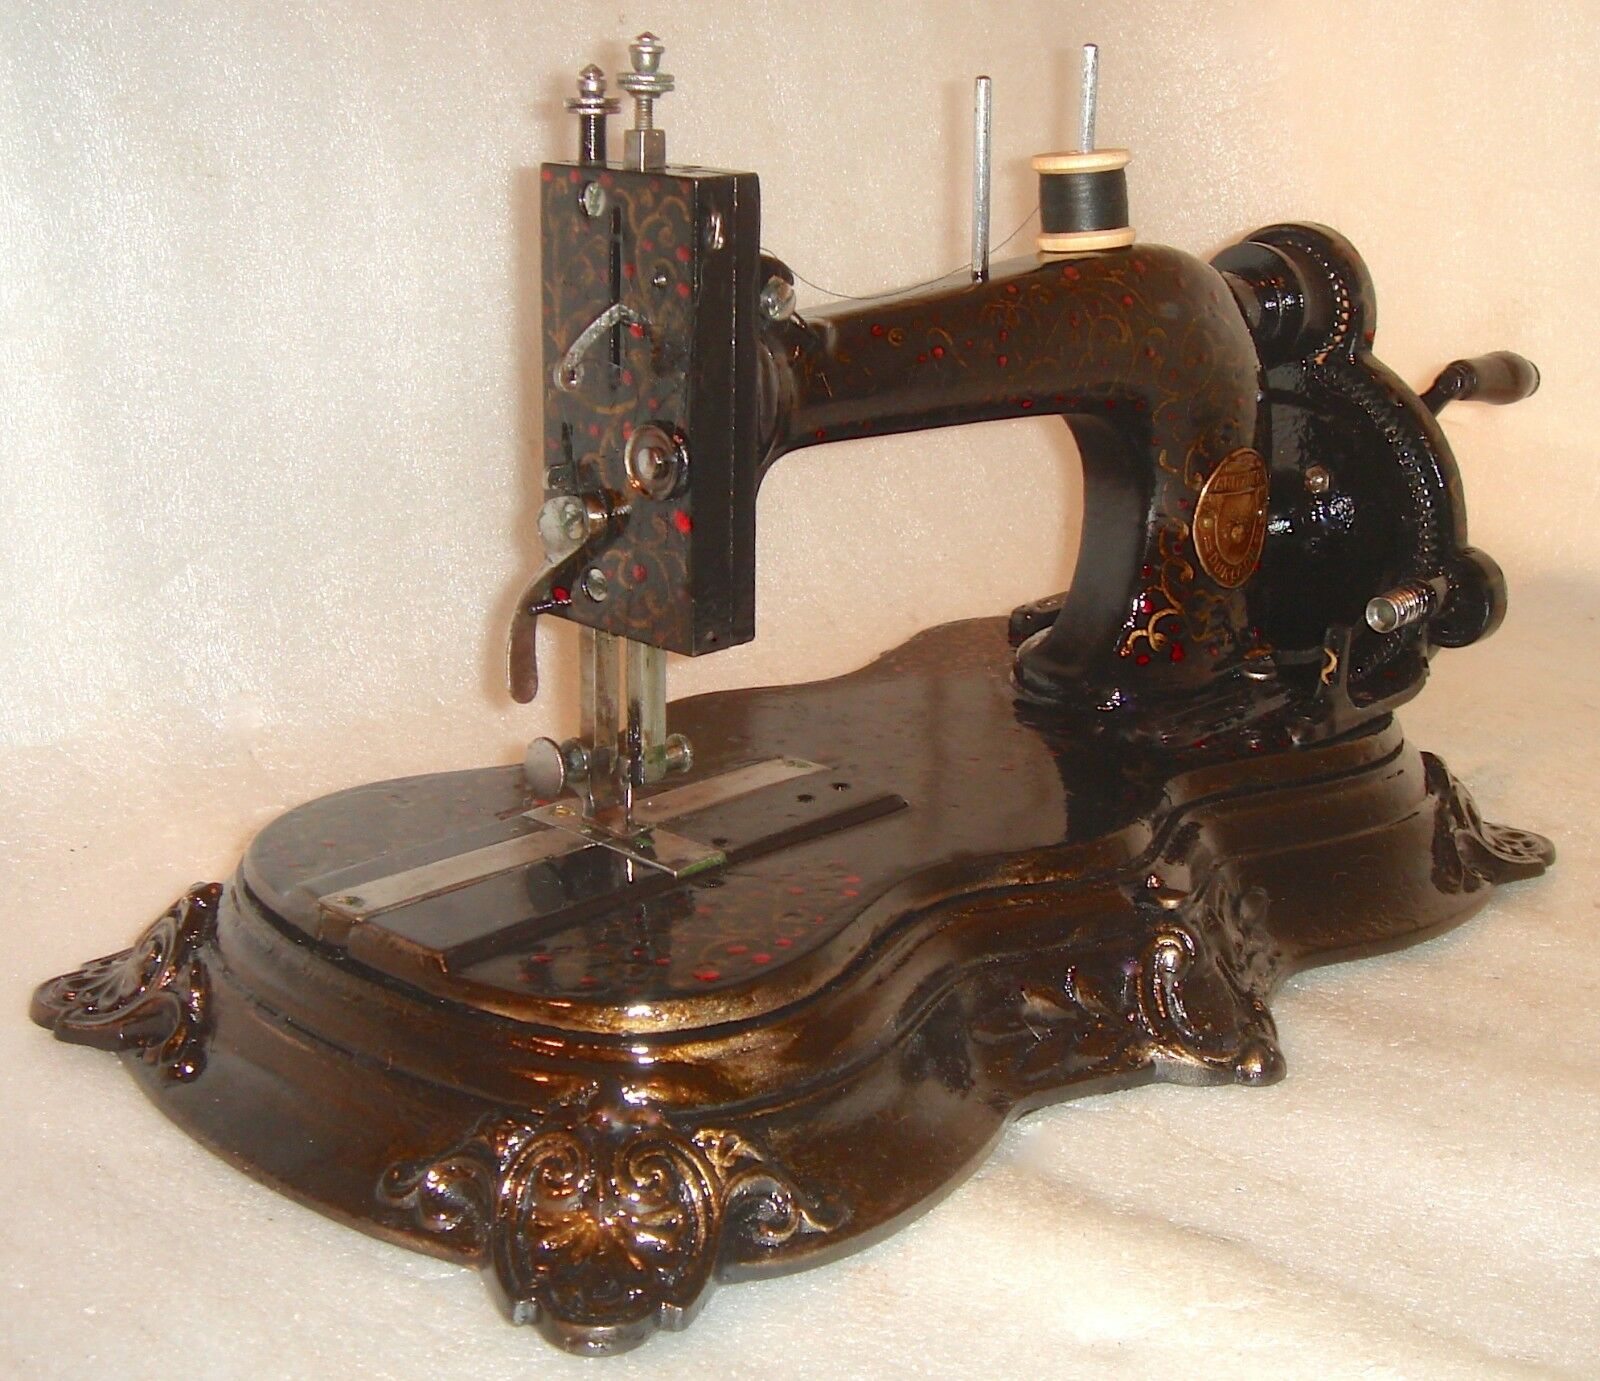 national sewing machine company serial numbers